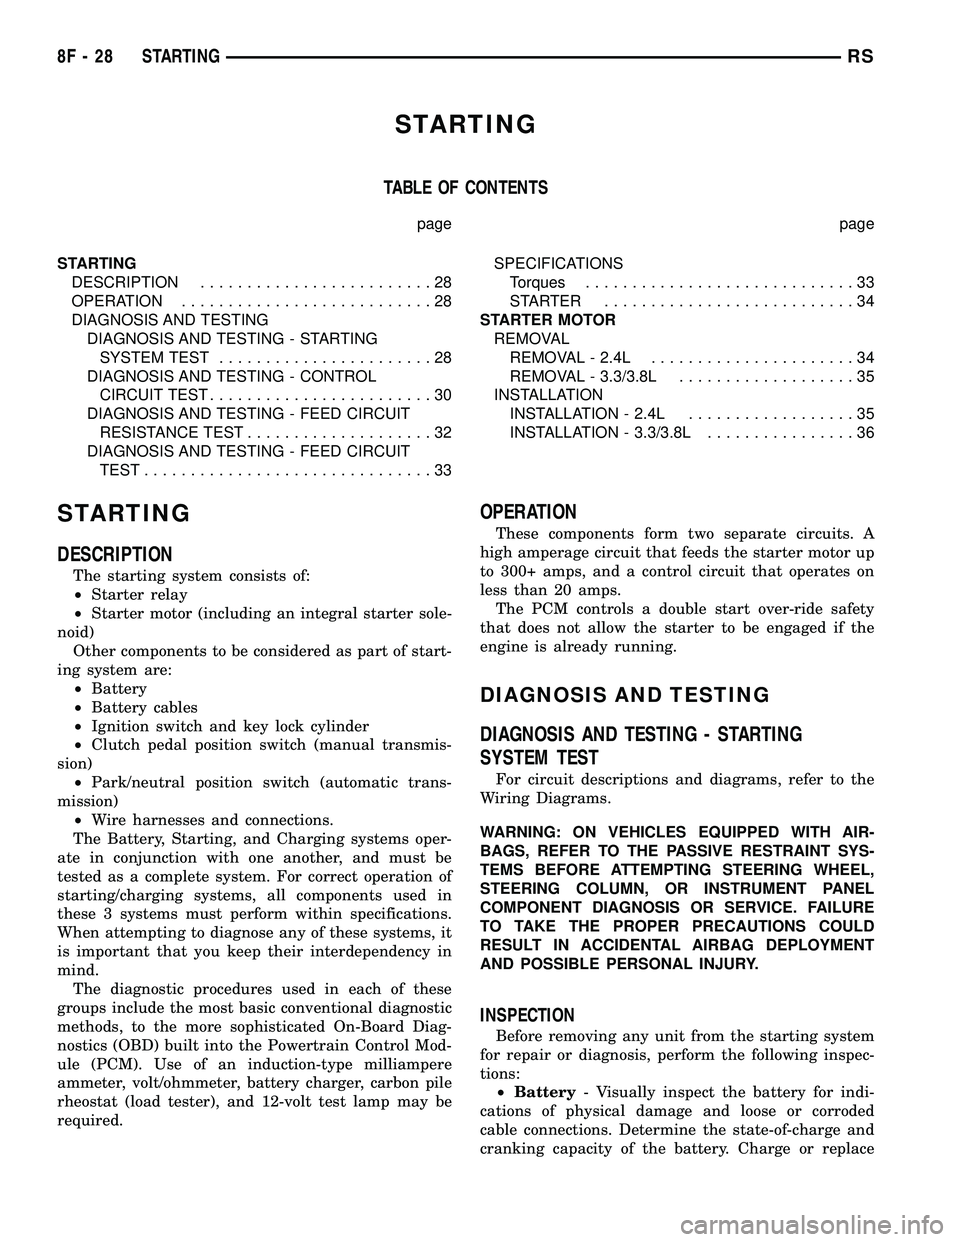 DODGE TOWN AND COUNTRY 2004  Service Manual STARTING
TABLE OF CONTENTS
page page
STARTING
DESCRIPTION.........................28
OPERATION...........................28
DIAGNOSIS AND TESTING
DIAGNOSIS AND TESTING - STARTING
SYSTEM TEST..........